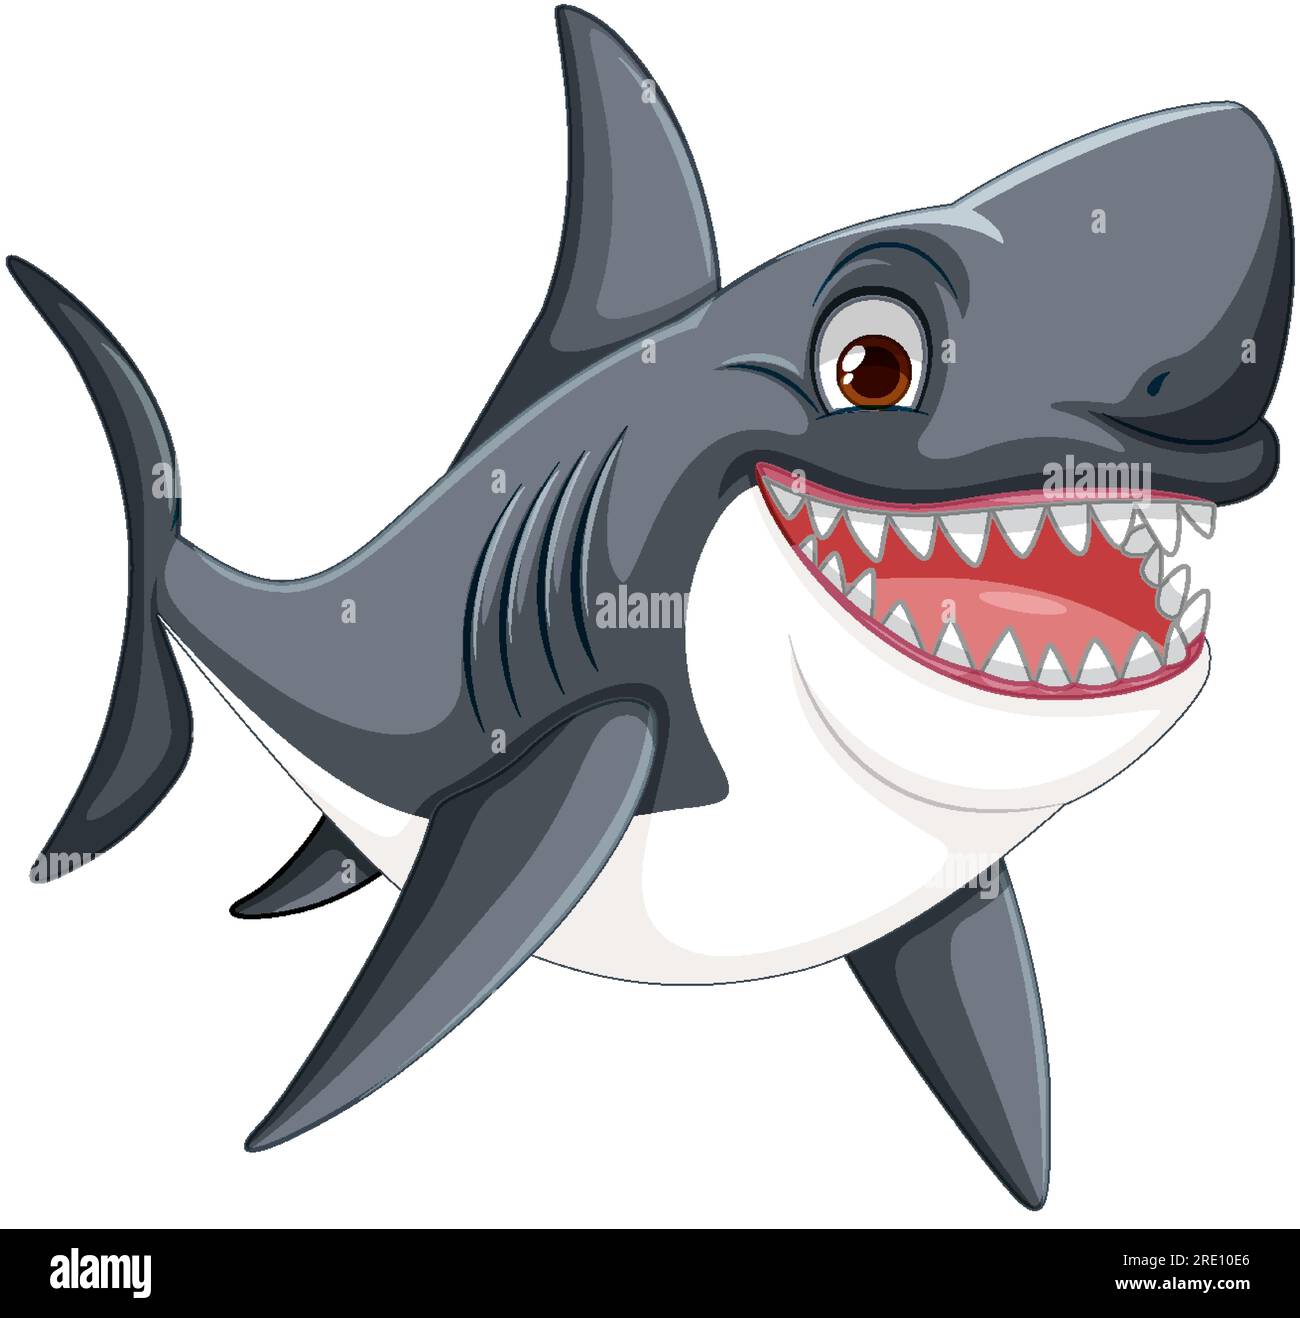 Shark smiling Cut Out Stock Images & Pictures - Page 3 - Alamy